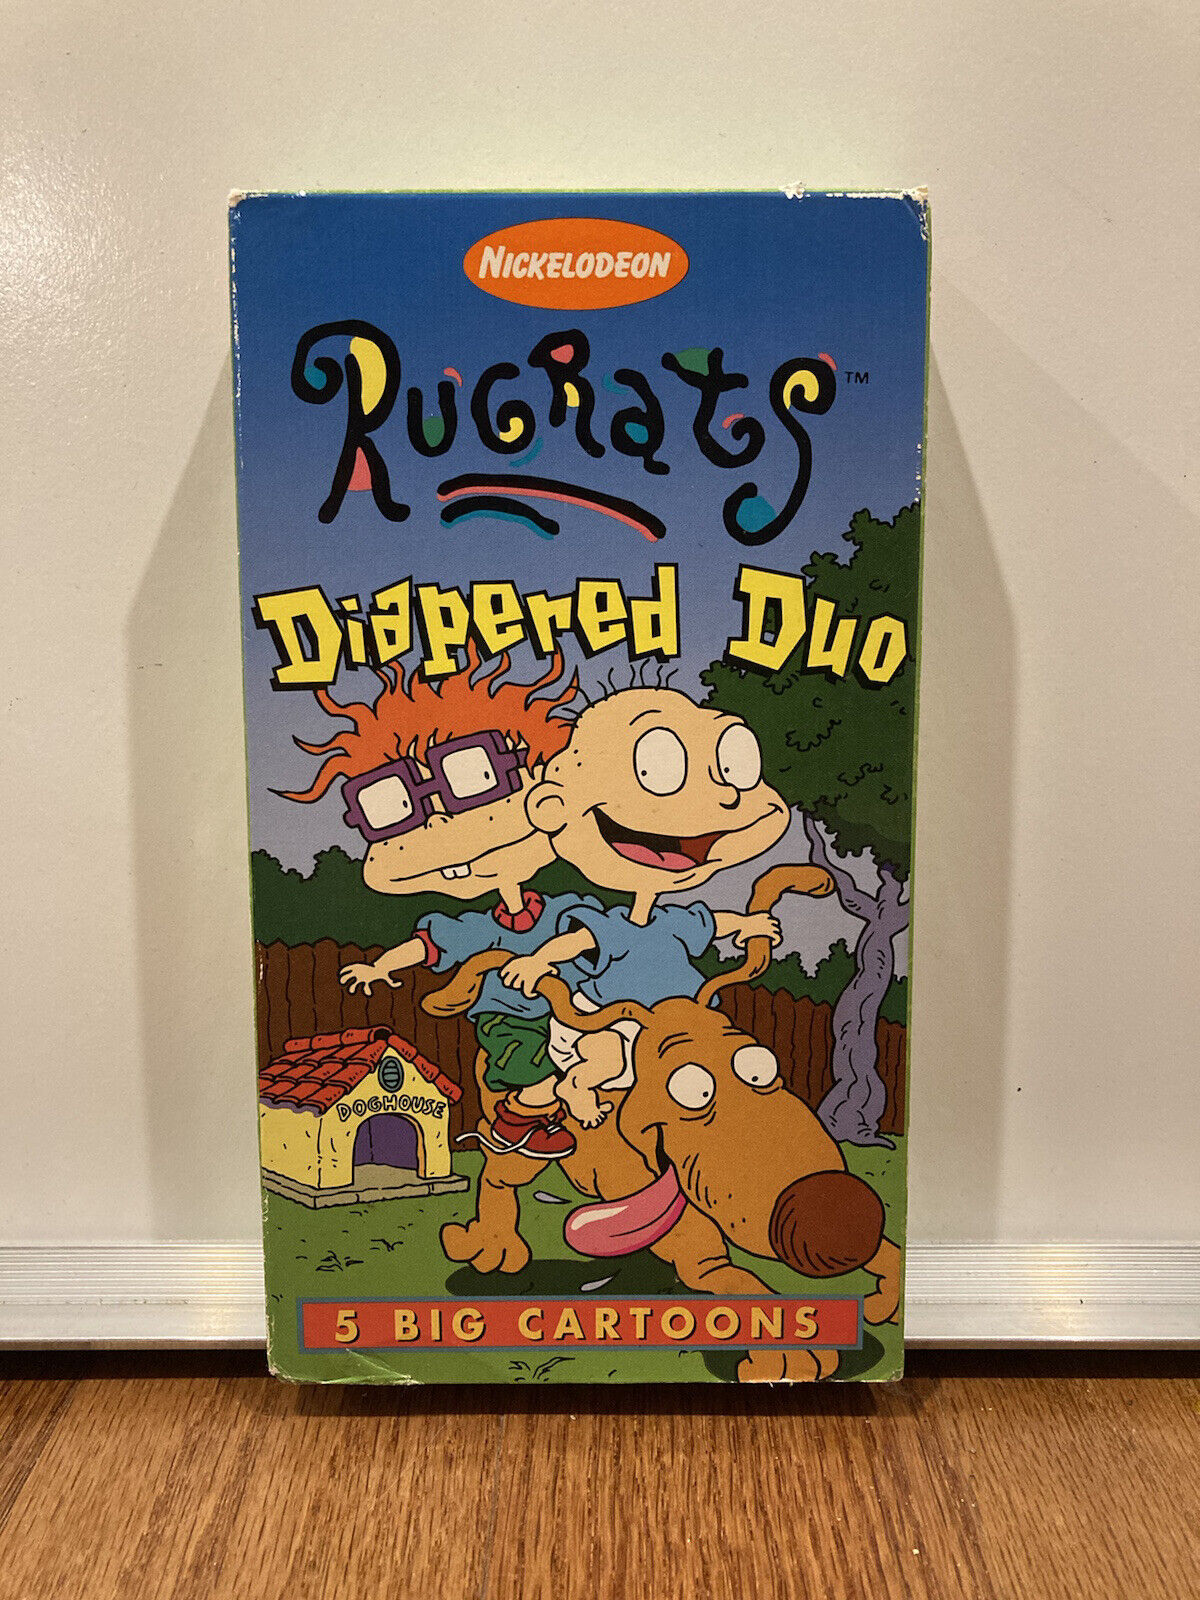 RUGRATS DIAPERED DUO Vhs Video Tape 1998 Animated Nickelodeon Klasky-Csupo